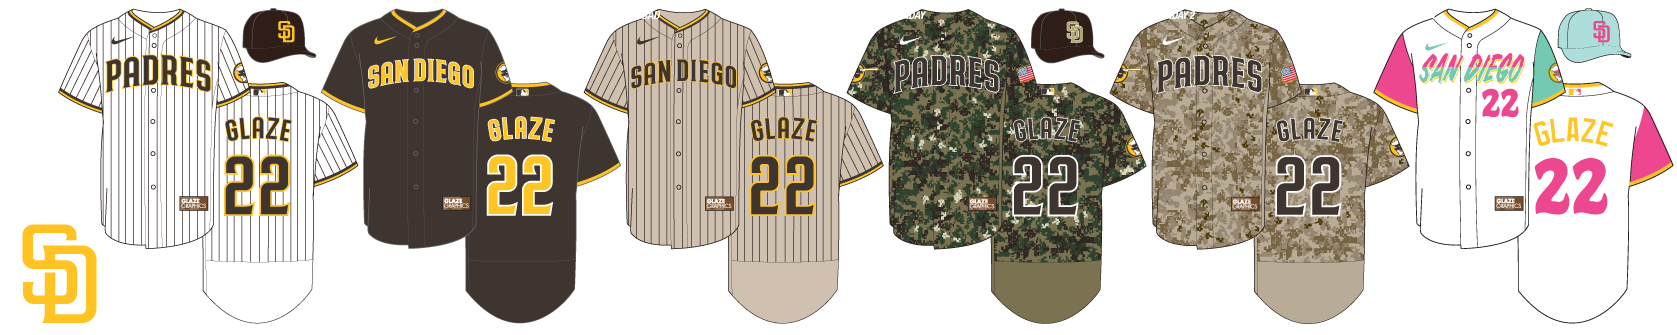 San Diego Padres Logos and Caps Through the Years: 1969-2020 